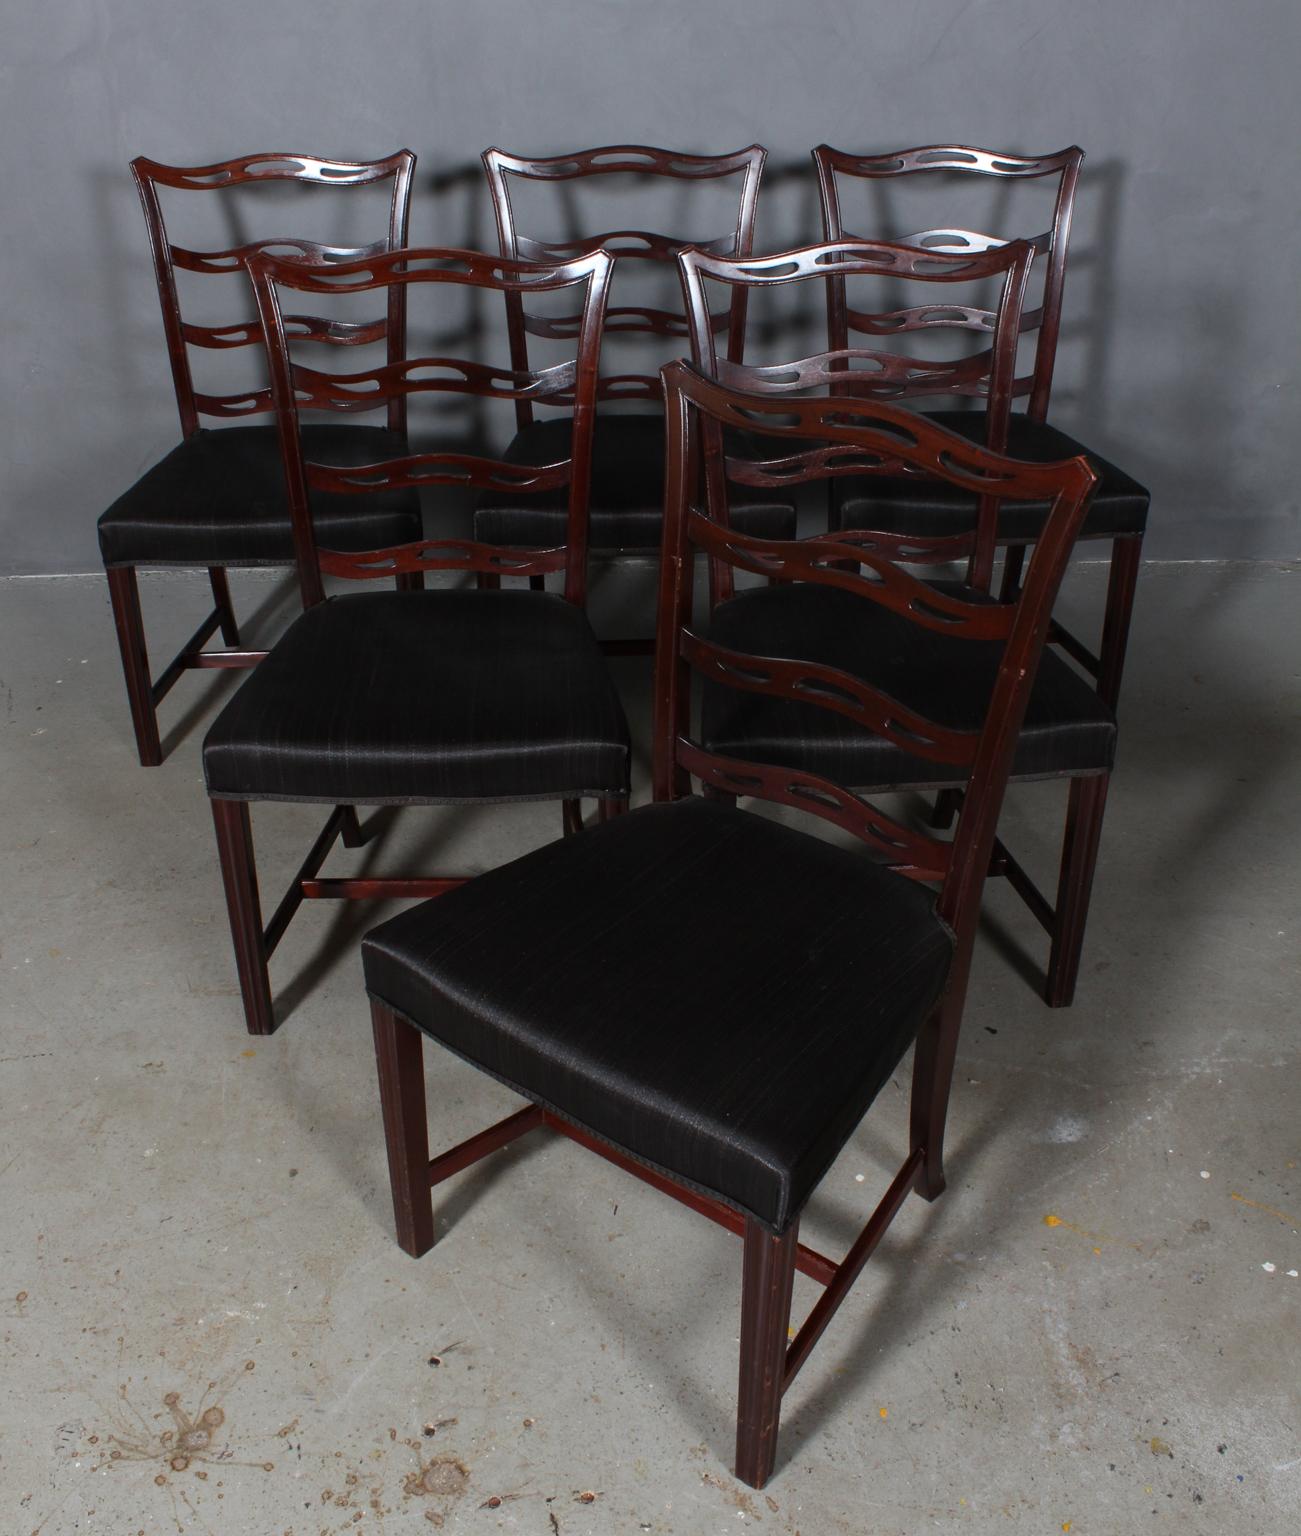 Georg Kofoed set of dining chairs.

Seat upholstered with horsehair.

Legs of mahogany.

Made by Georg Kofoed in the 1930s.